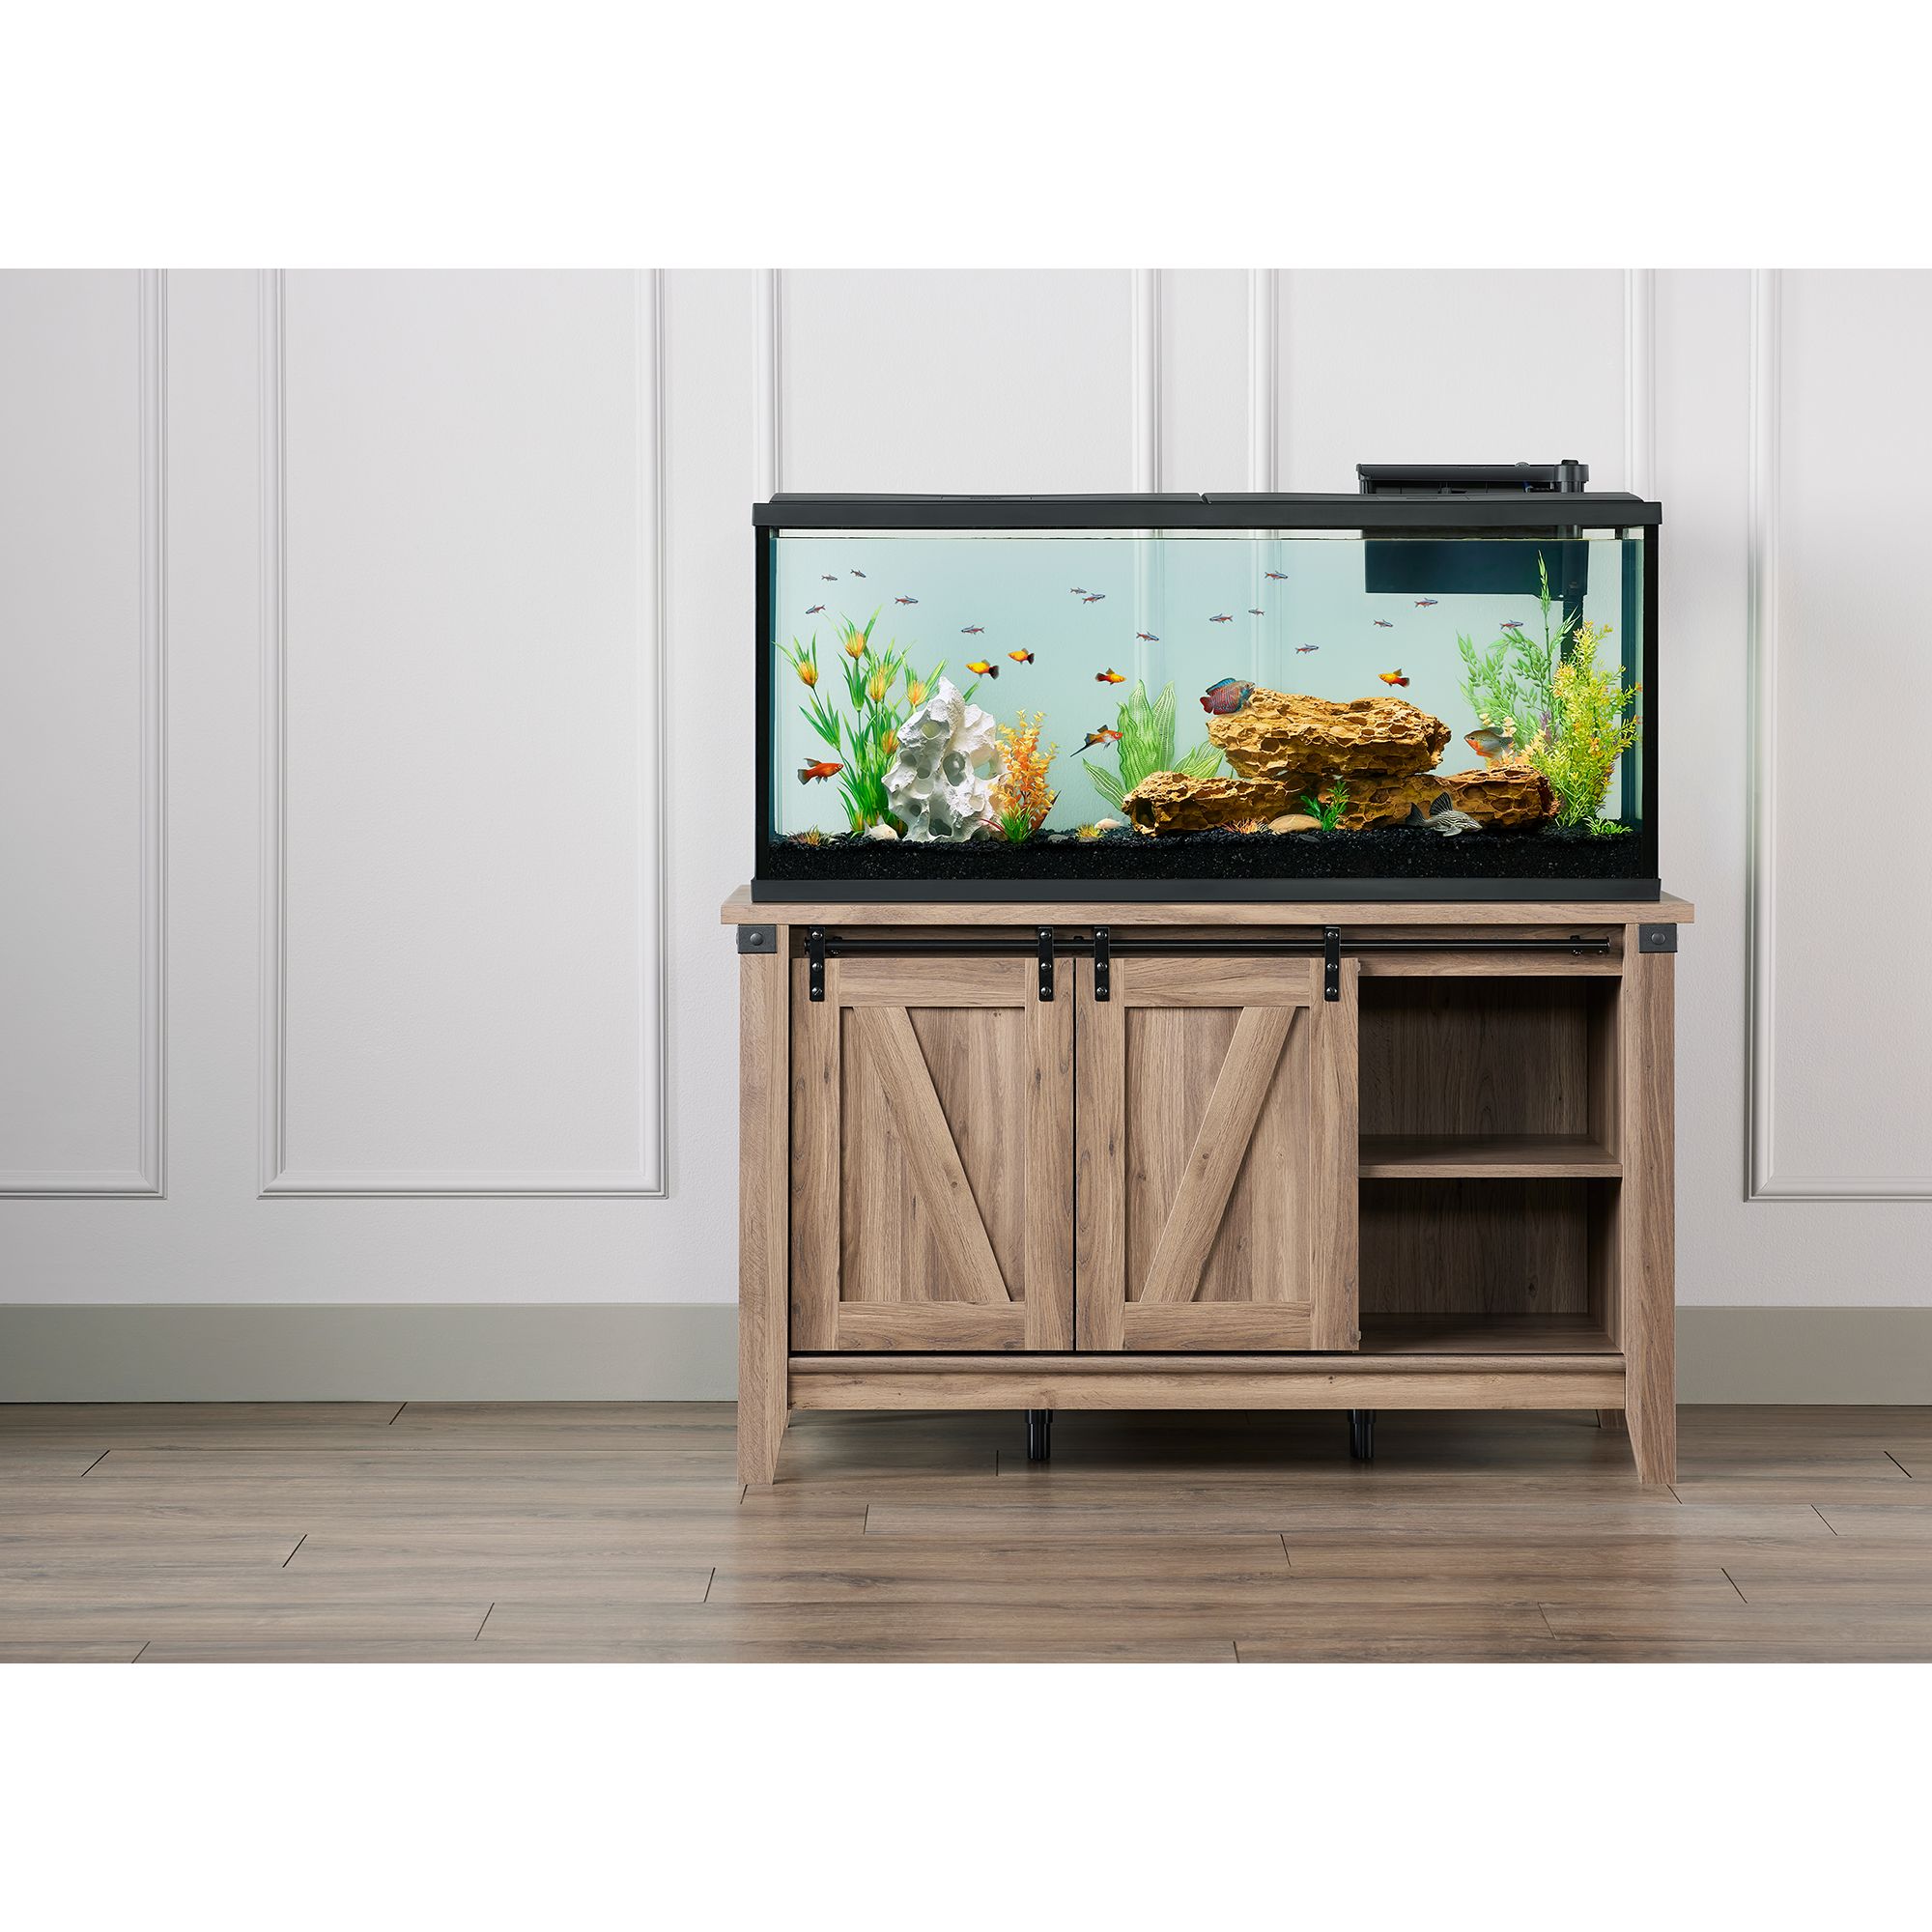 Focused on the Magic : Liven up your fish tank with PetSmart